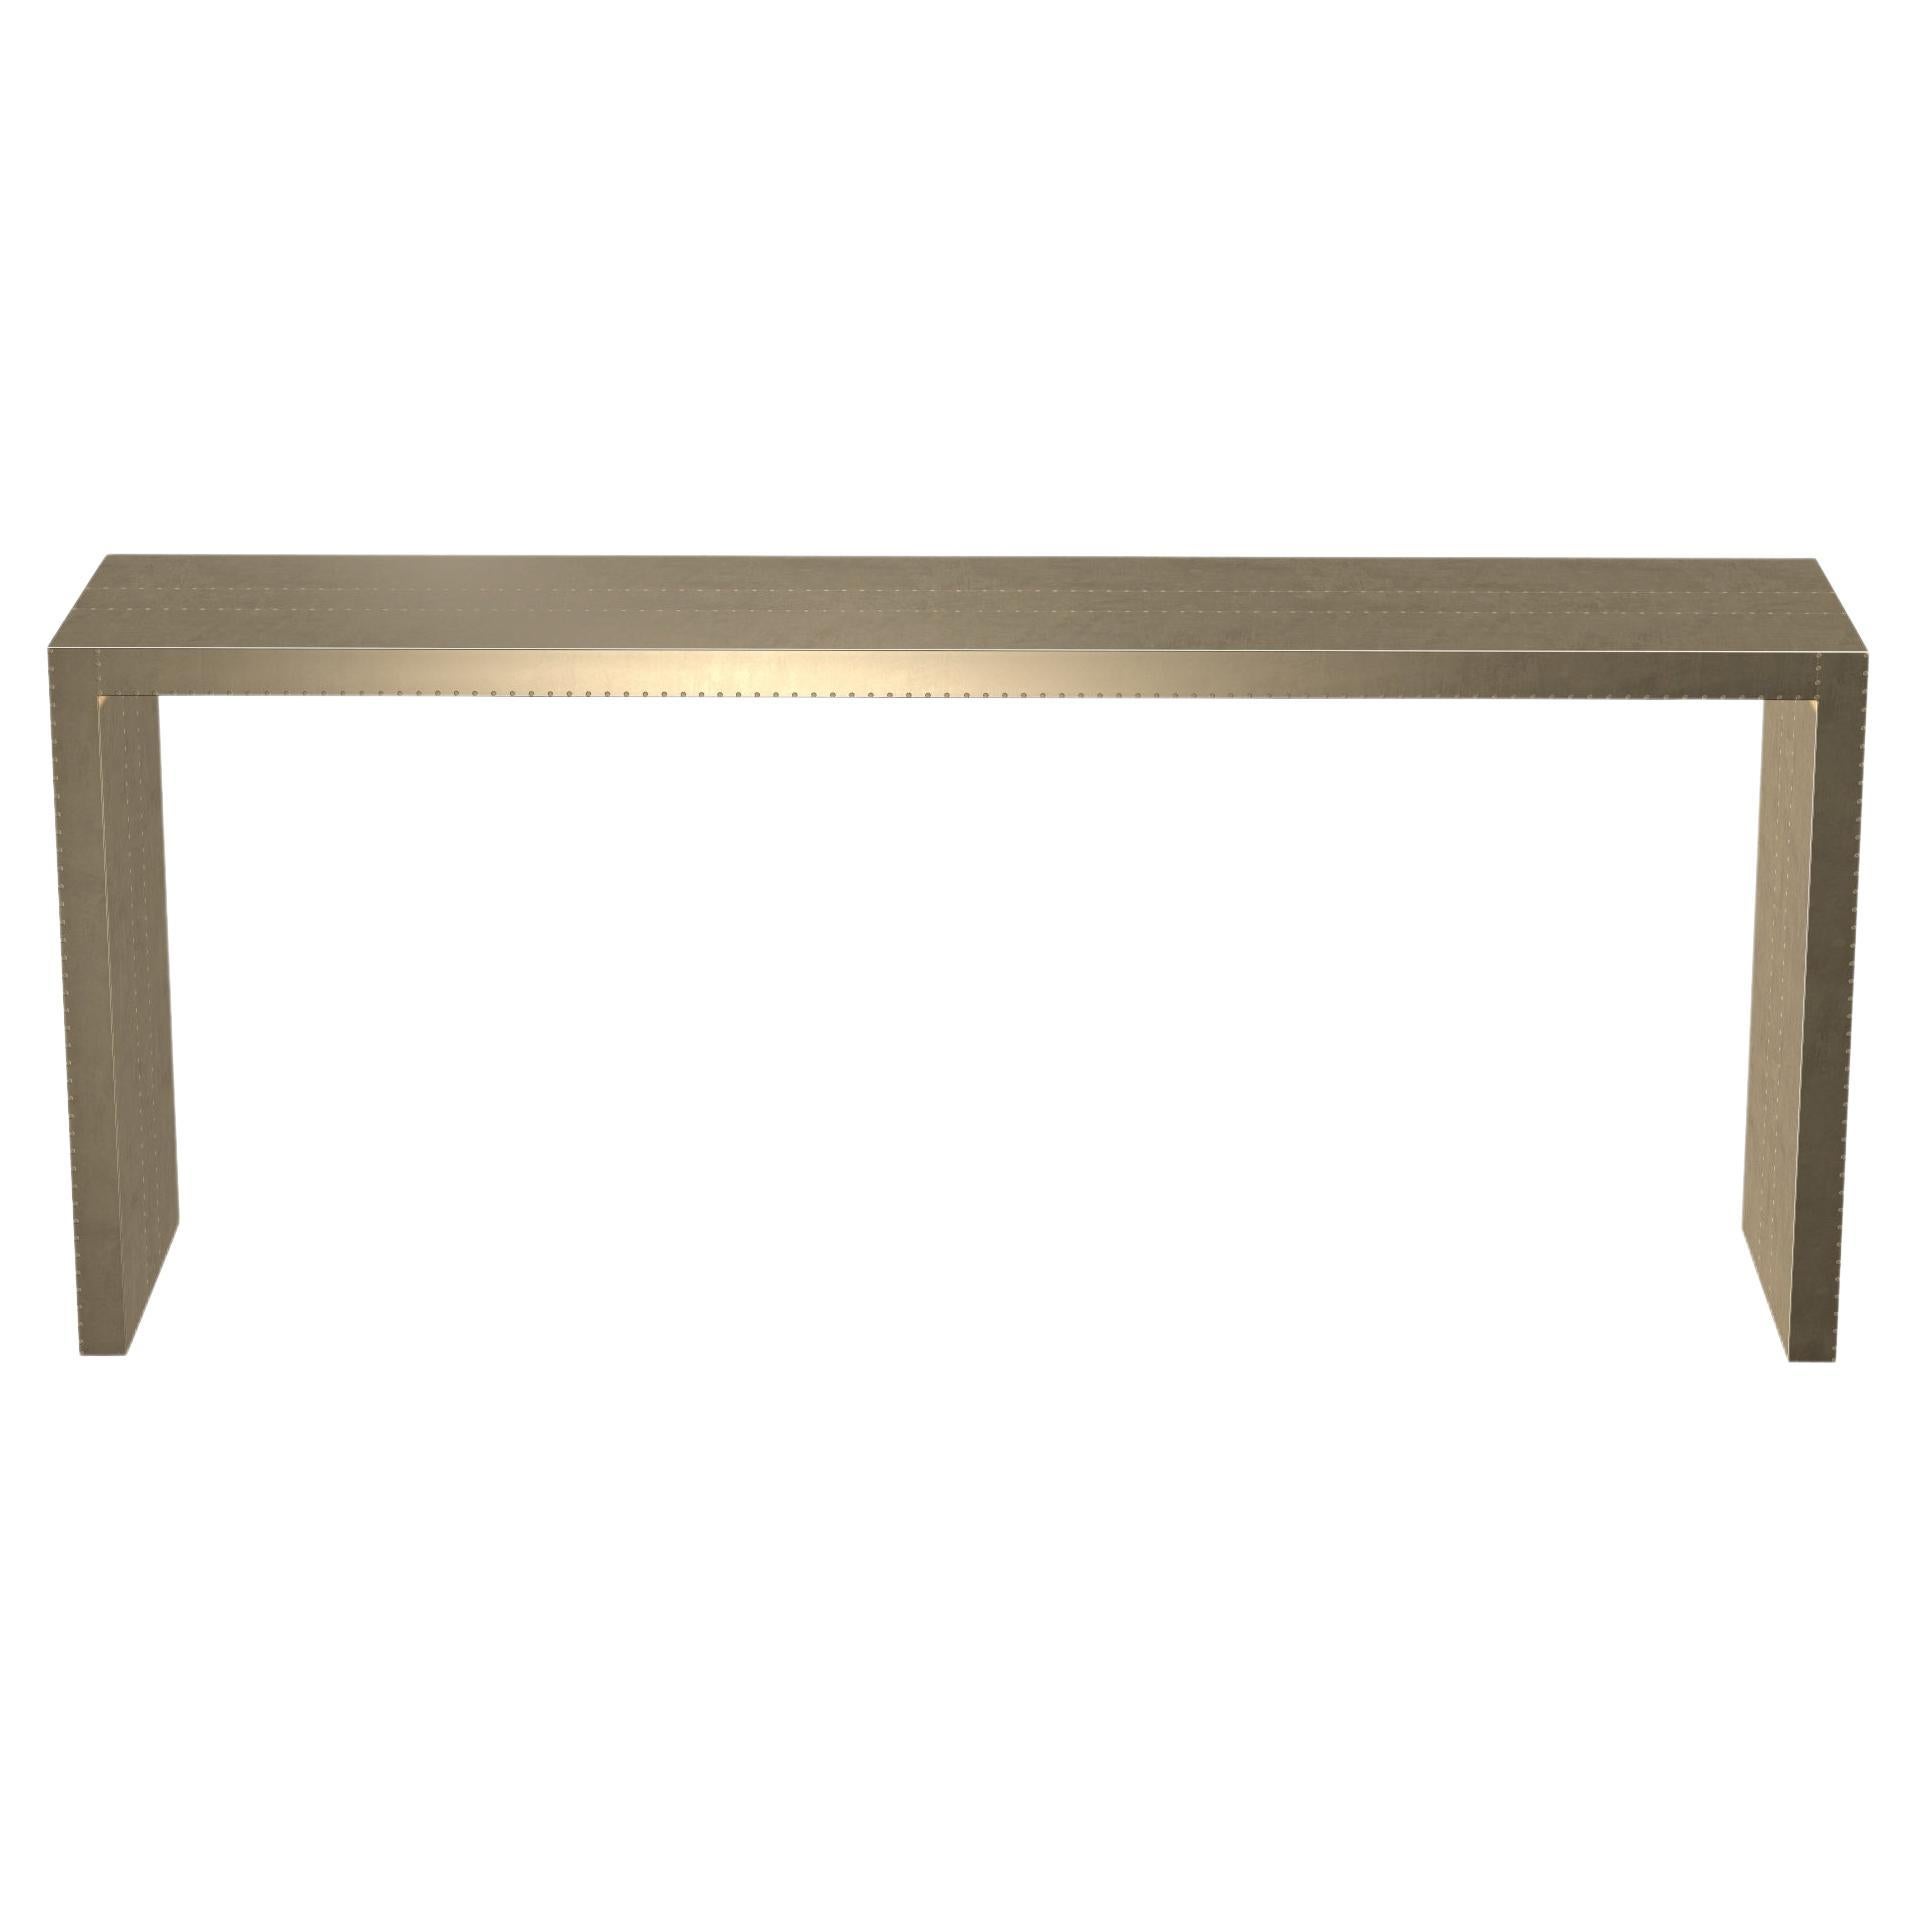 Art Deco Card Tables and Tea Tables Rectangular Console in Smooth Brass  For Sale